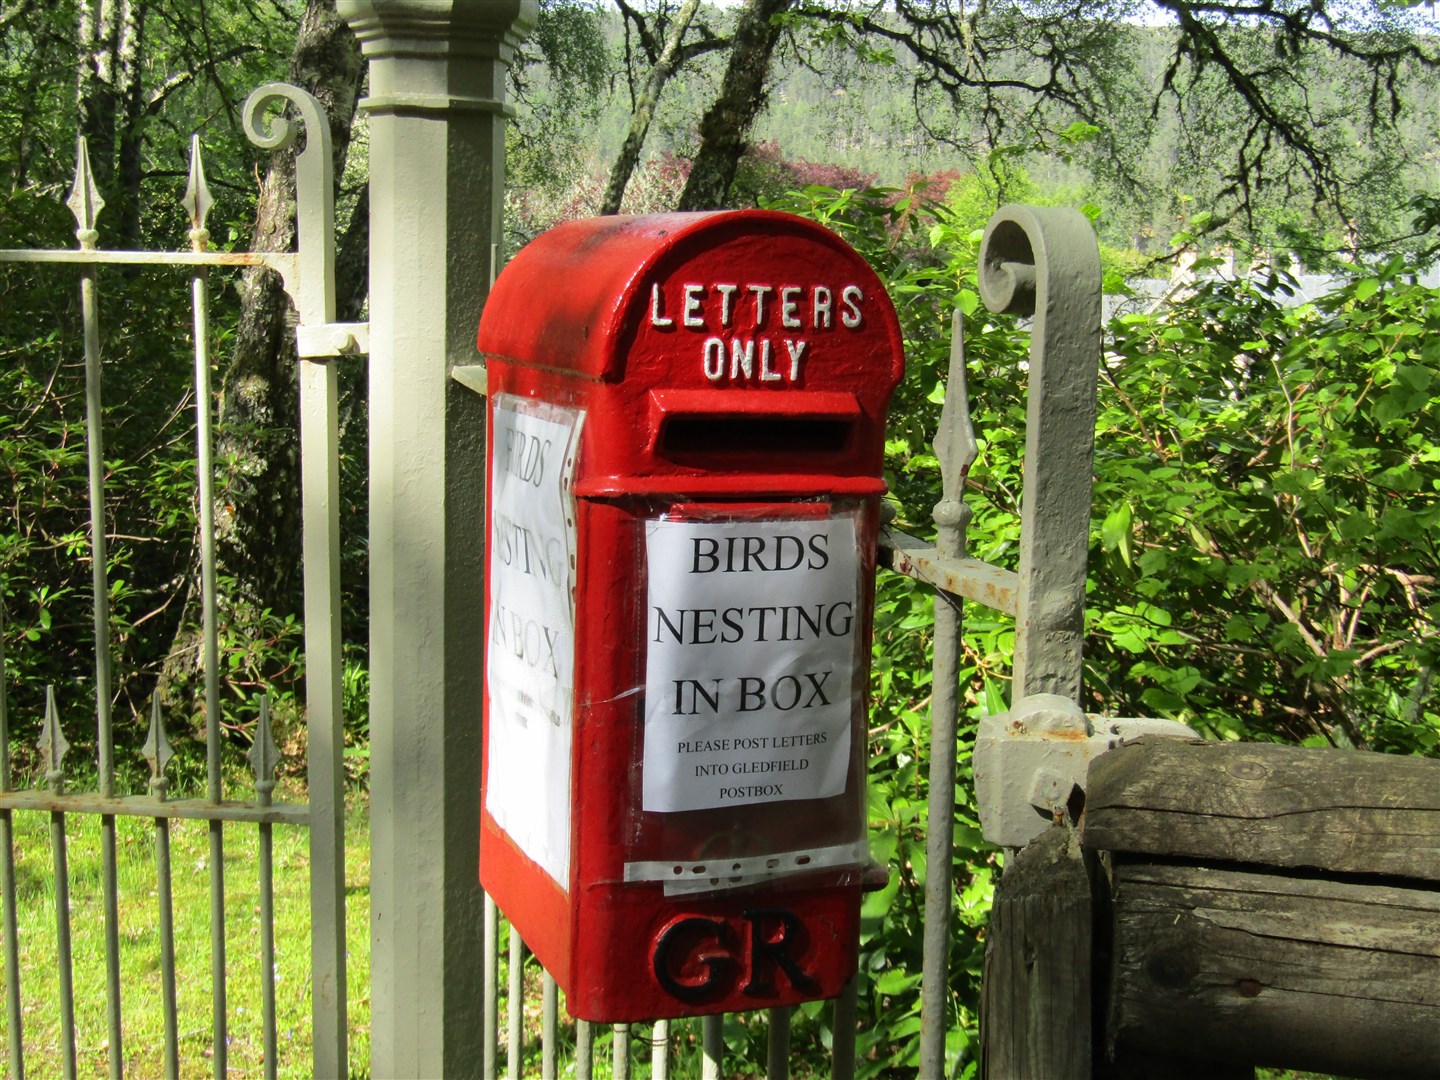 Great tits have been seen flying in and out of the post box.